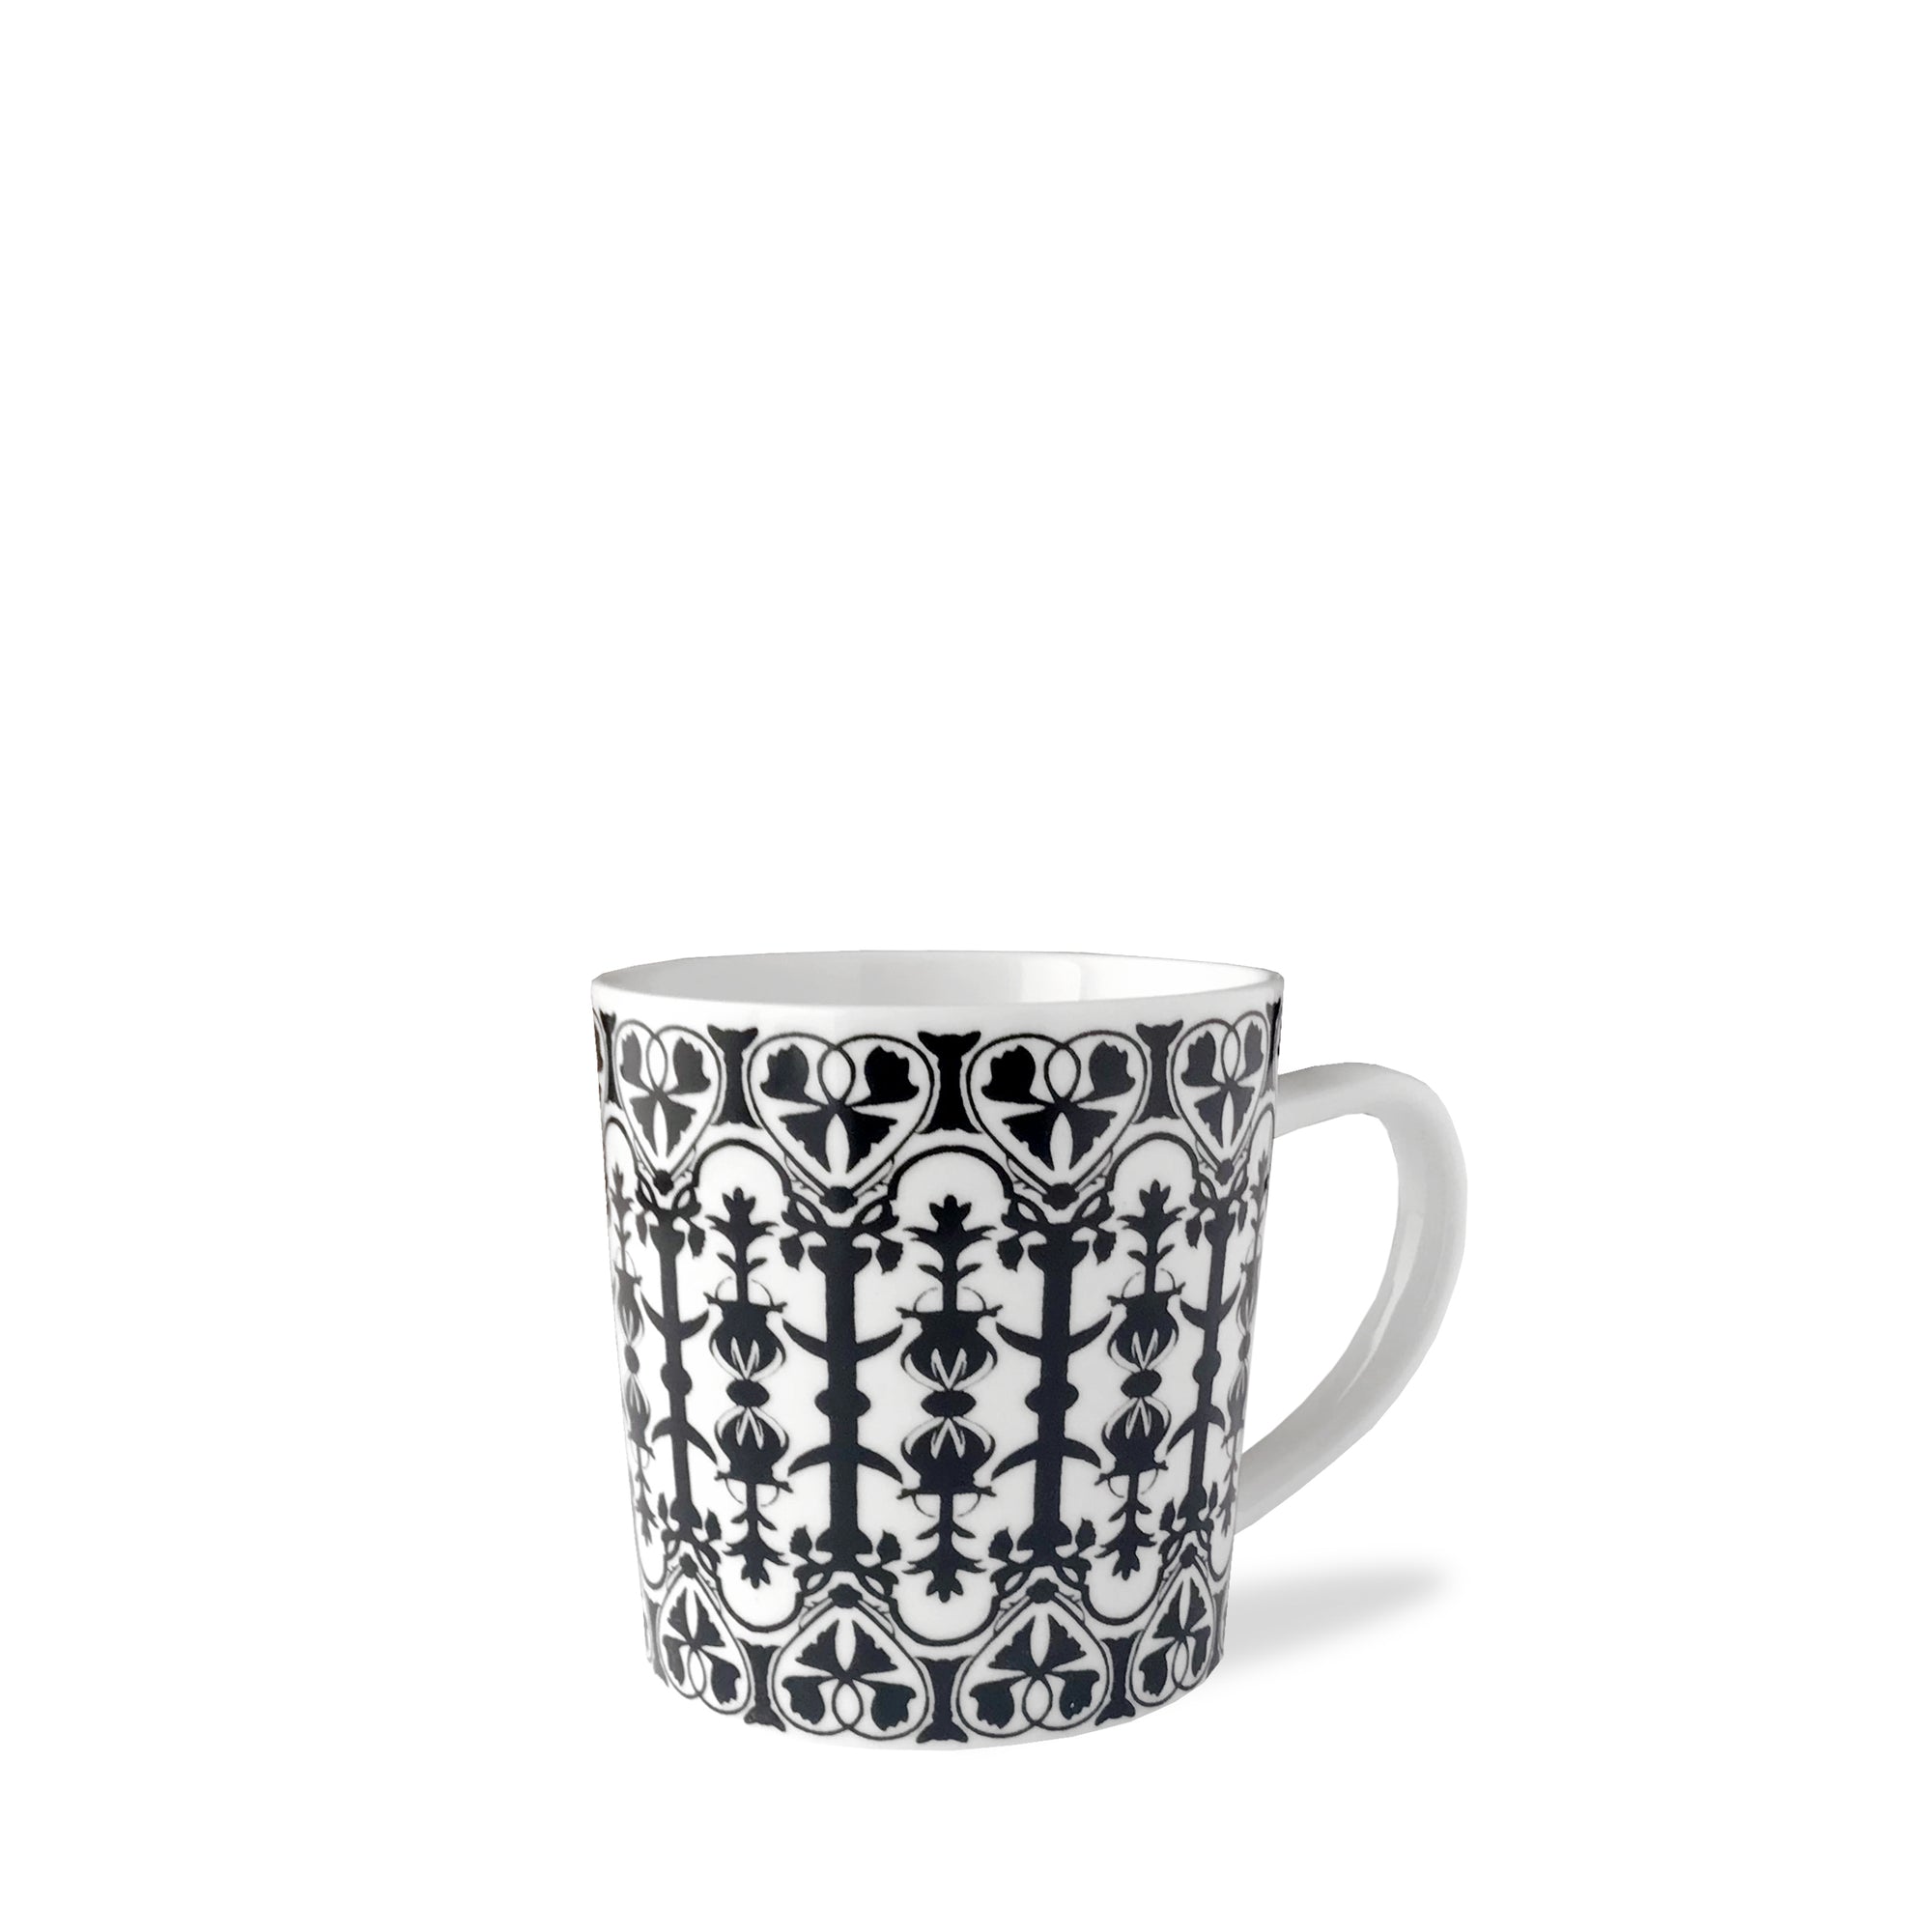 A white ceramic mug with a black intricate pattern featuring symmetrical shapes and lines. The Casablanca Mug, by Caskata Artisanal Home, has a handle on the right side.